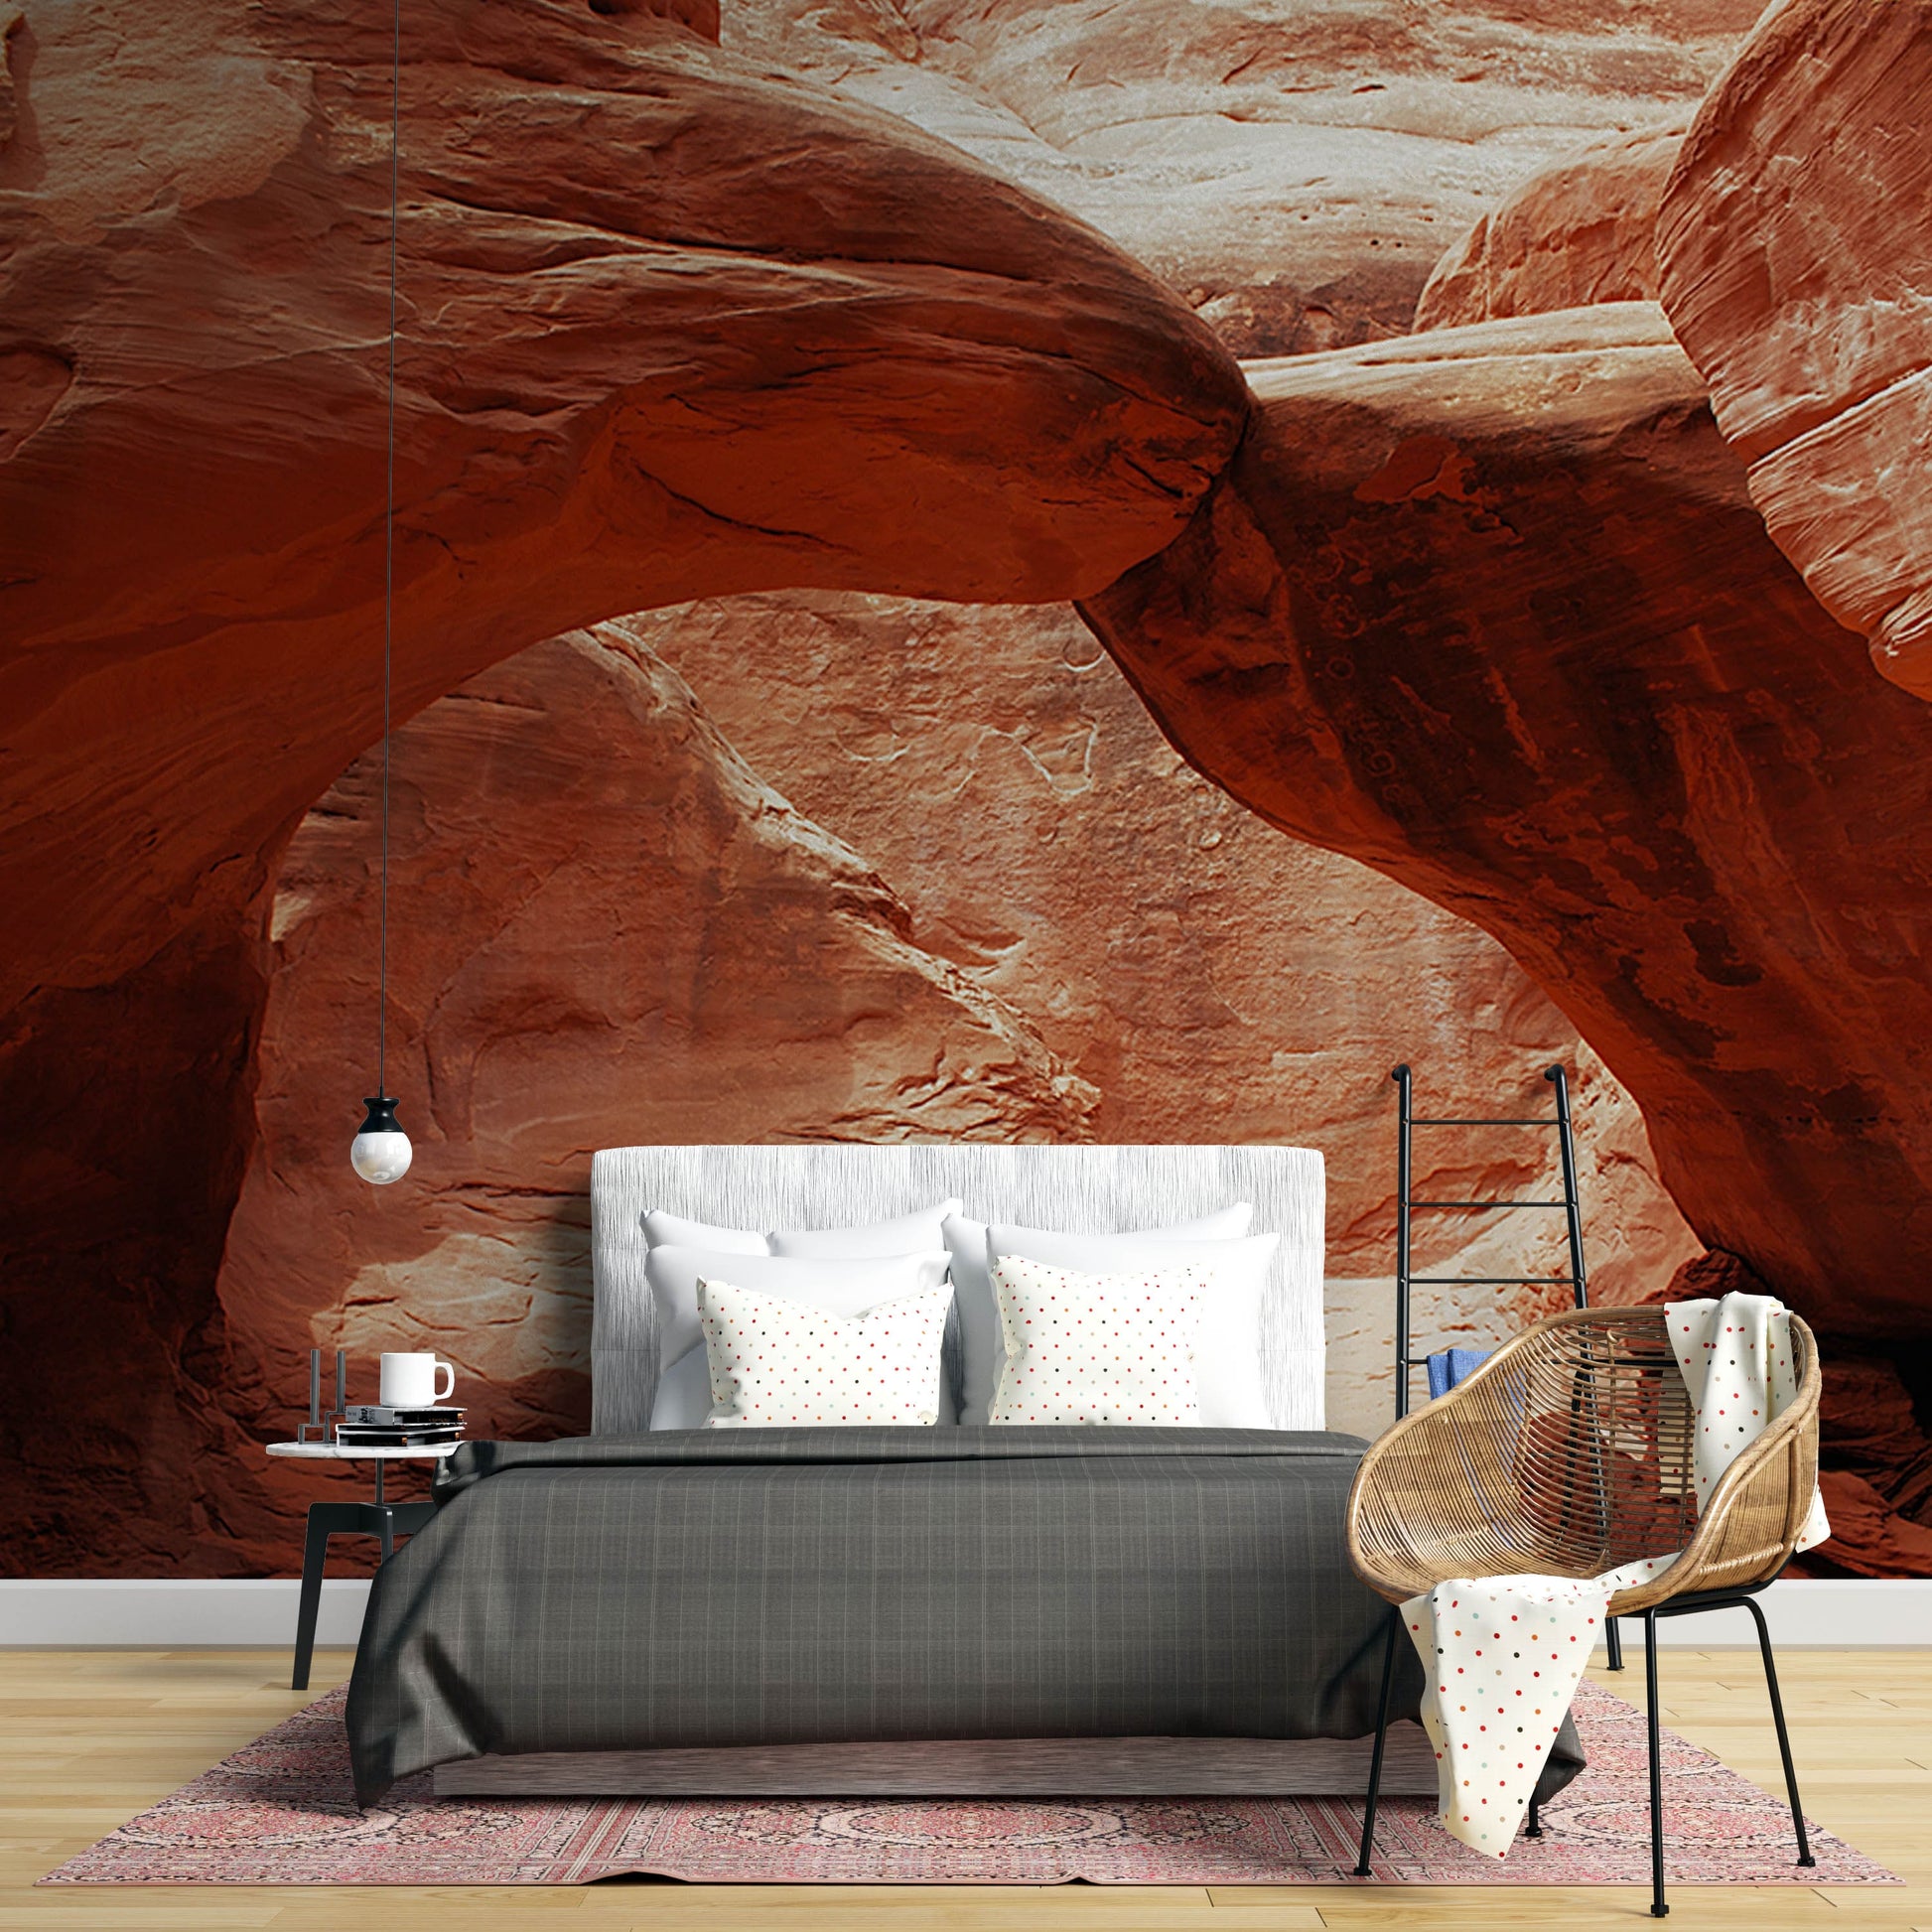 Rough Canyon Wall Mural Printed Wallpaper in the Style of a Desert Landscape for the Decoration of Bedrooms